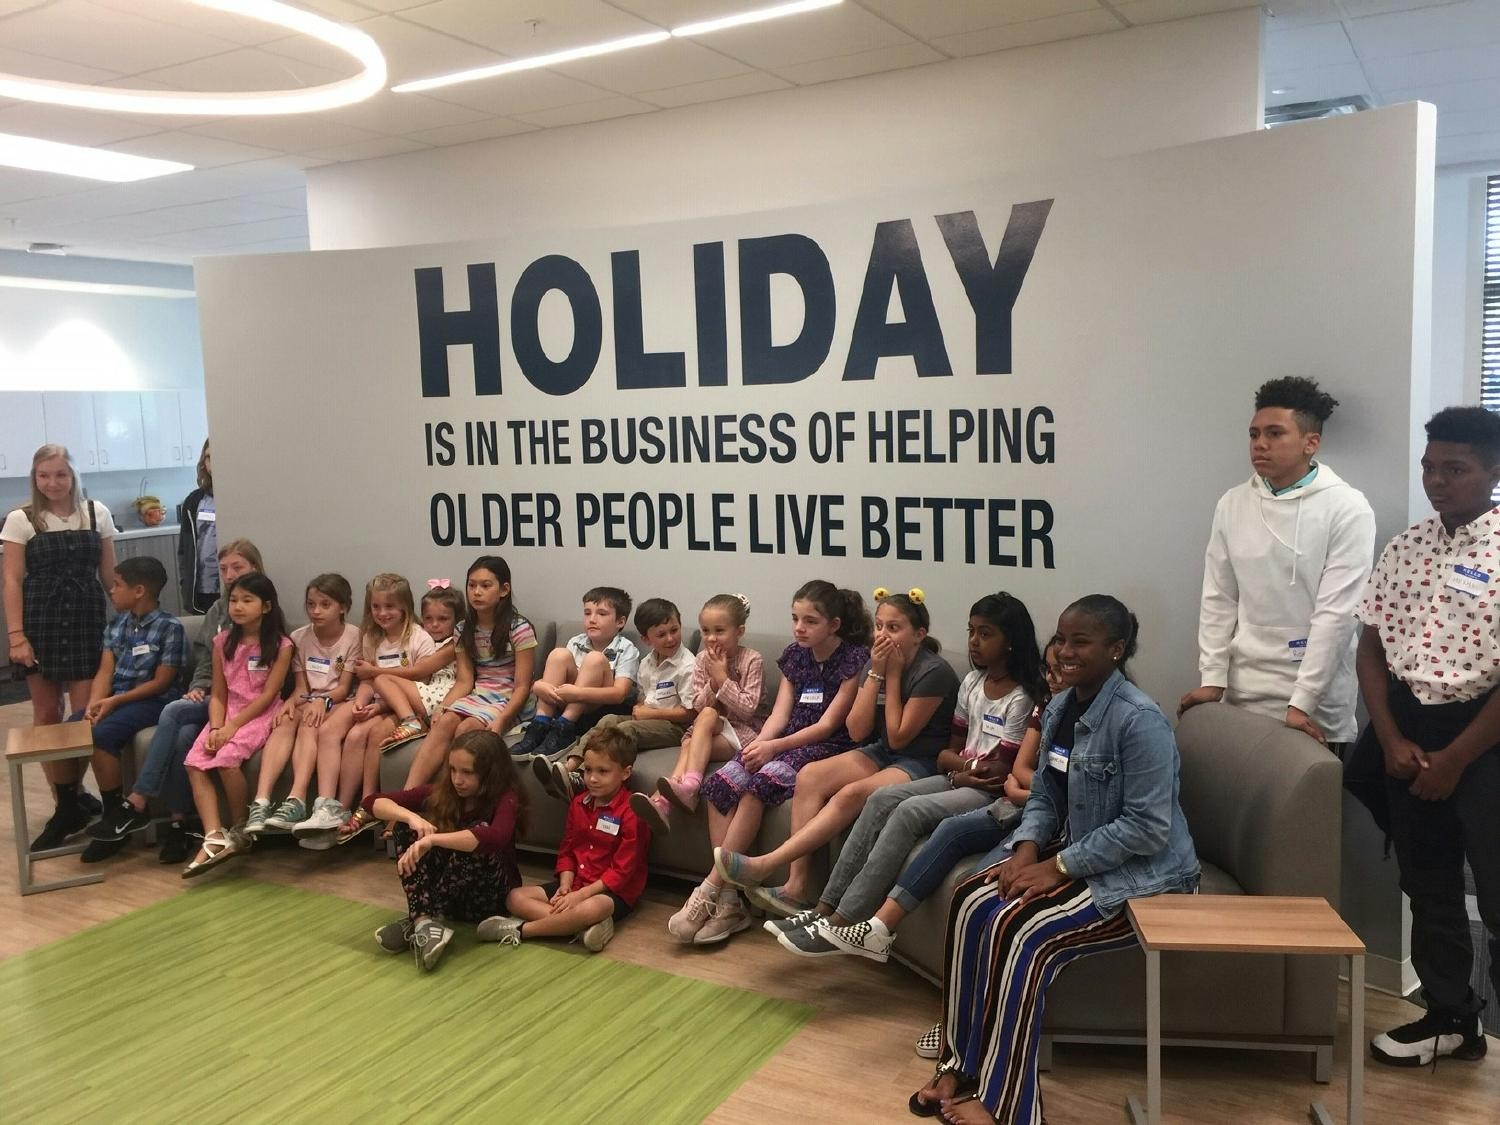 Take Your Child to Work Day at our Holiday Support Center